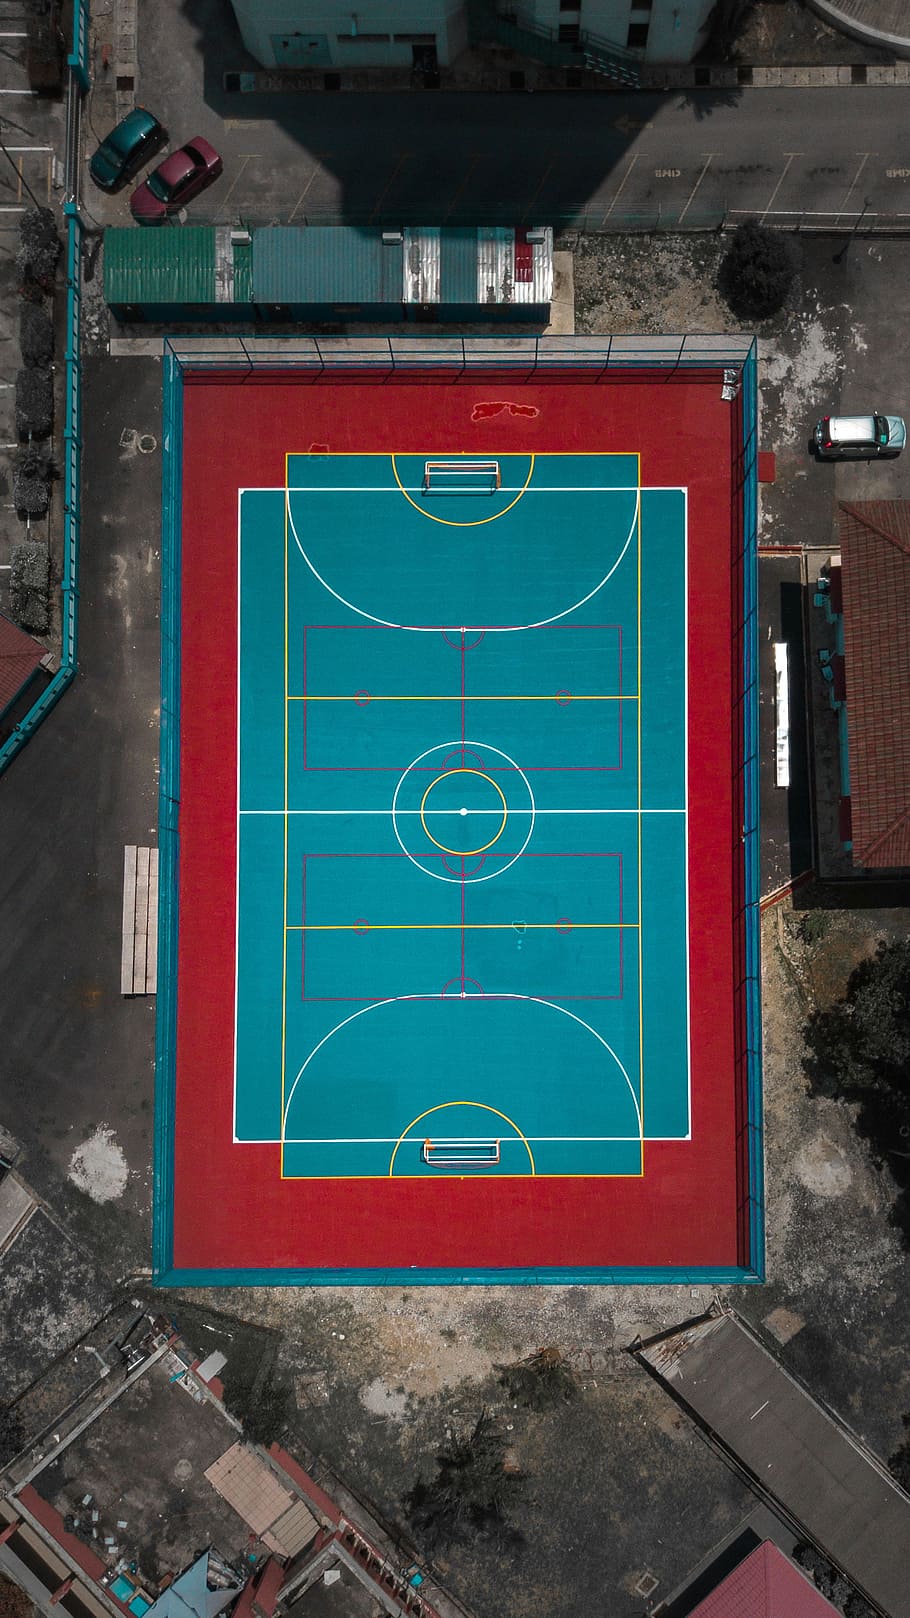 Hd Wallpaper Aerial View Of Soccer Field Court Game City